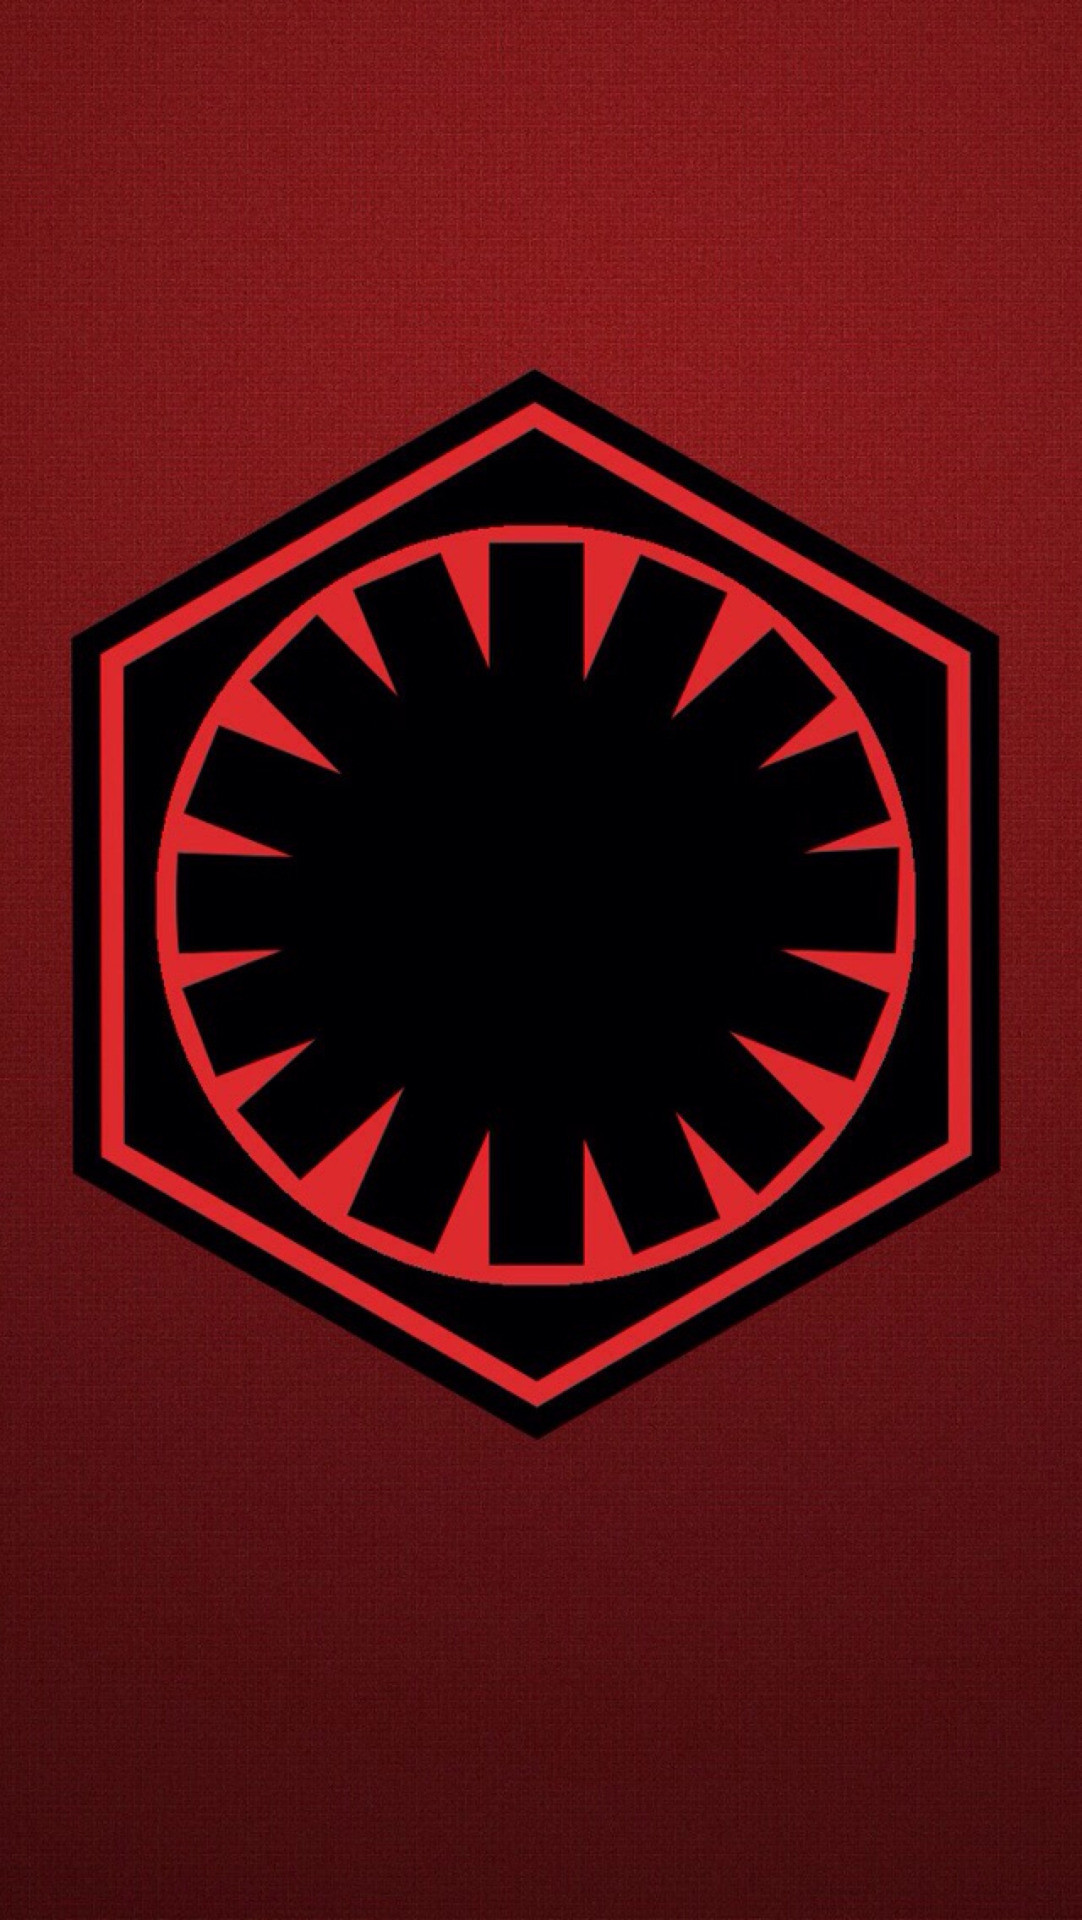 First Order iPhone wallpaper. I thought you all would enjoy! Happy